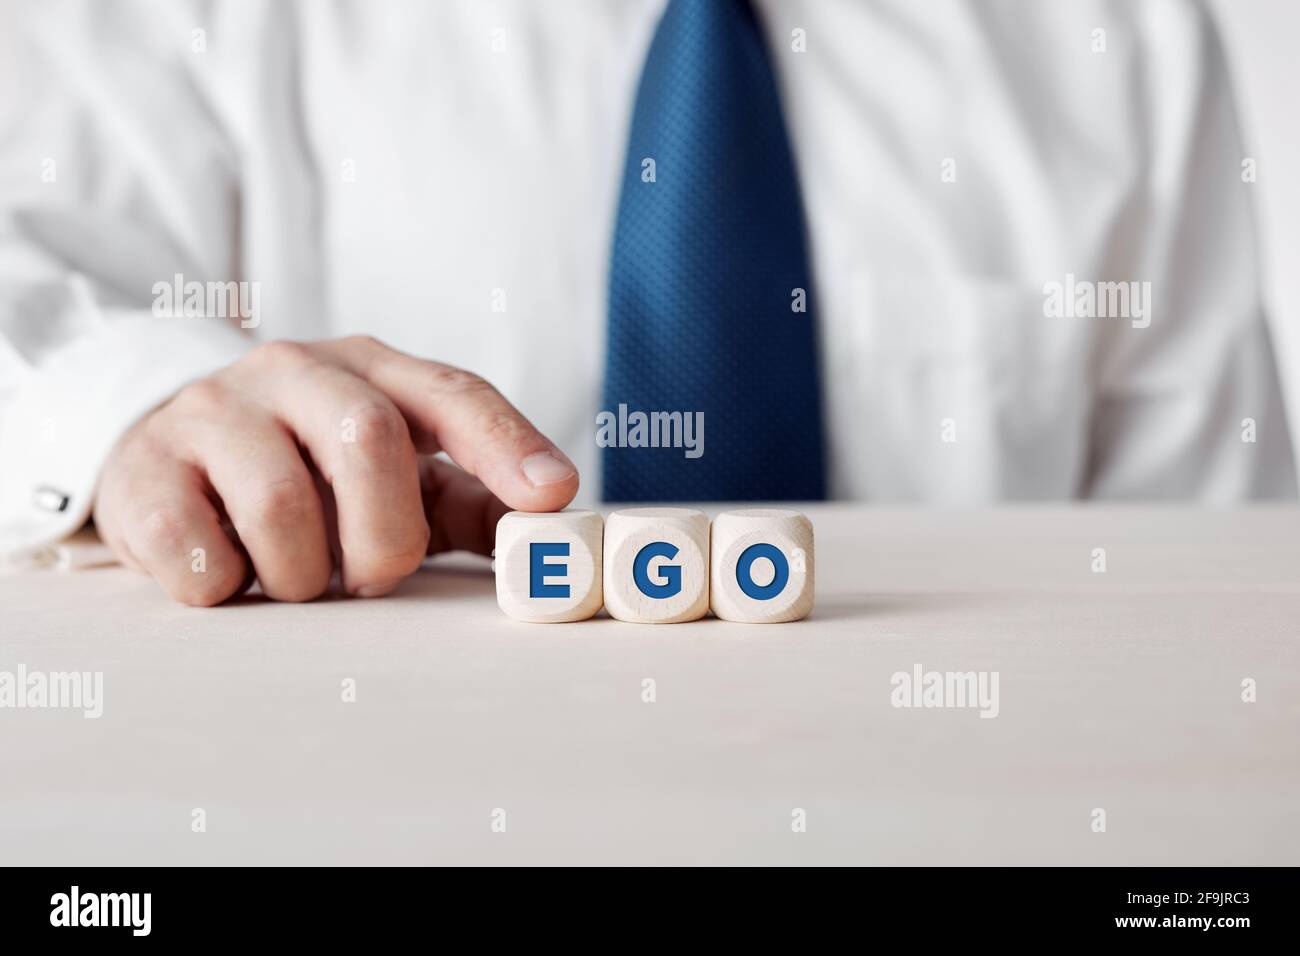 Businessman pressing his finger on the wooden cubes with the word ego. Personal ego, narcissism or selfishness concept. Stock Photo